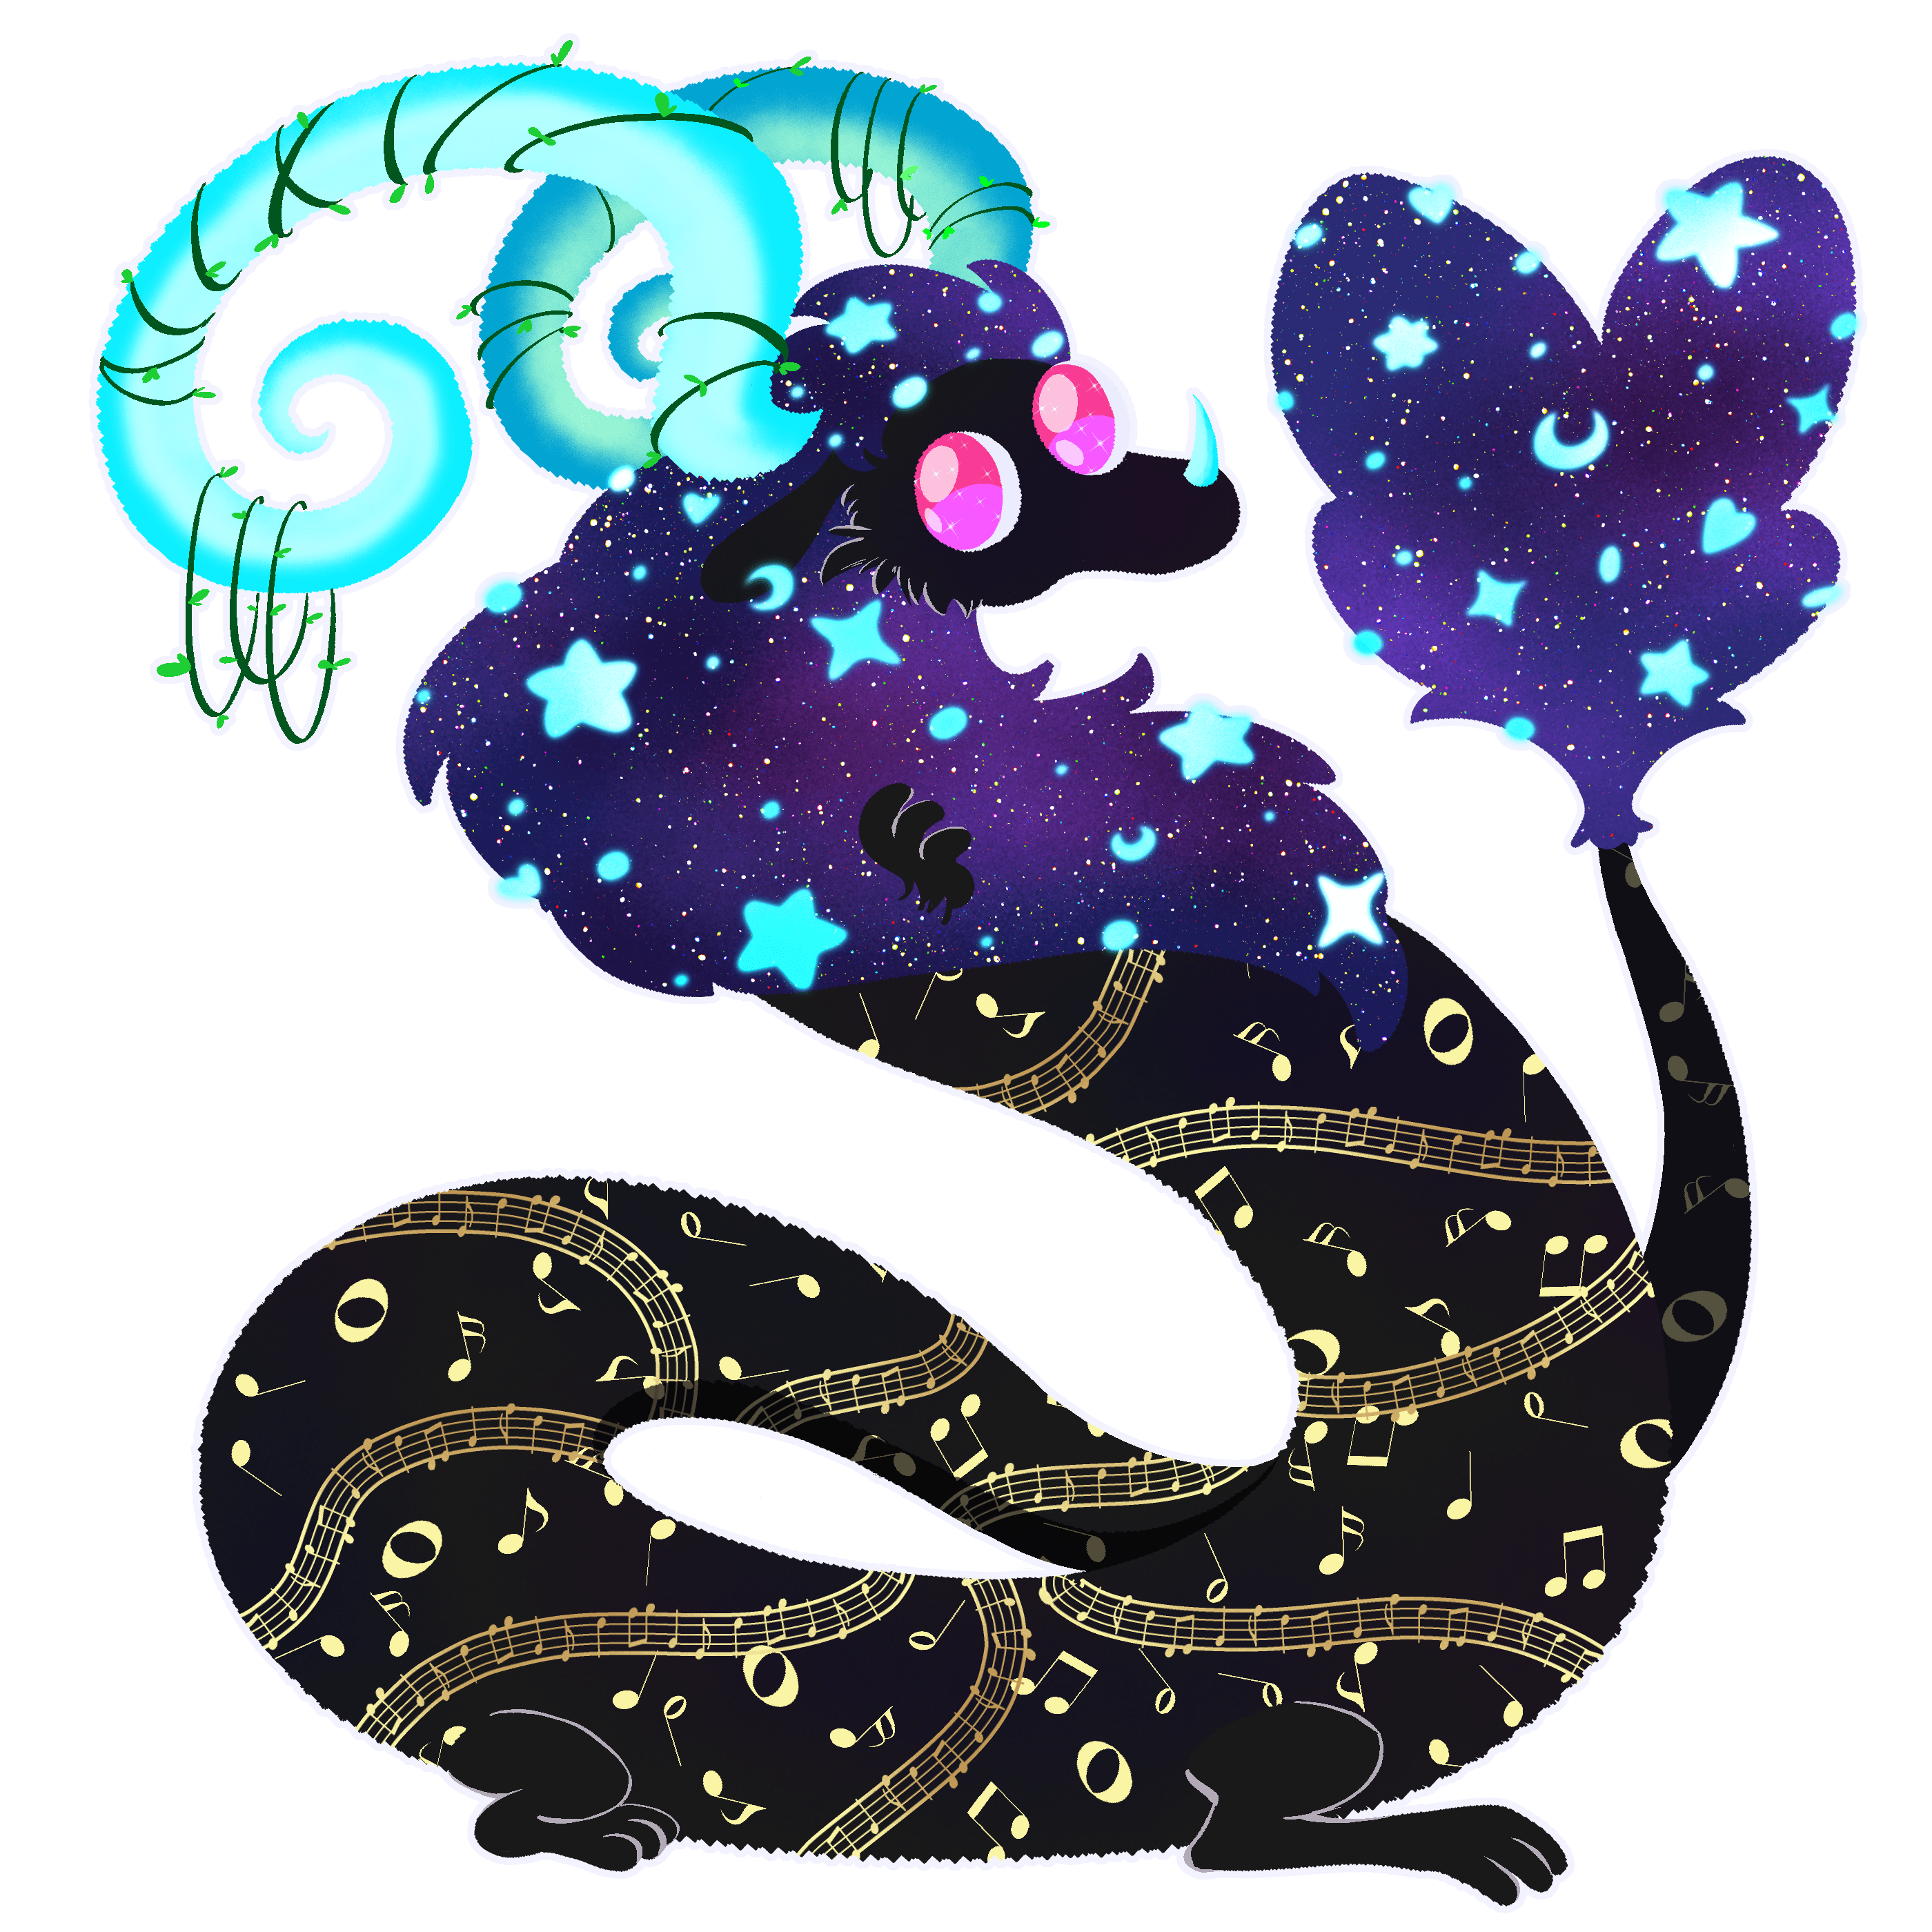 Retro is an Eastern dragon with a purple starry mane, a black body with golden music notes, neon blue curly horns, and big pink eyes.